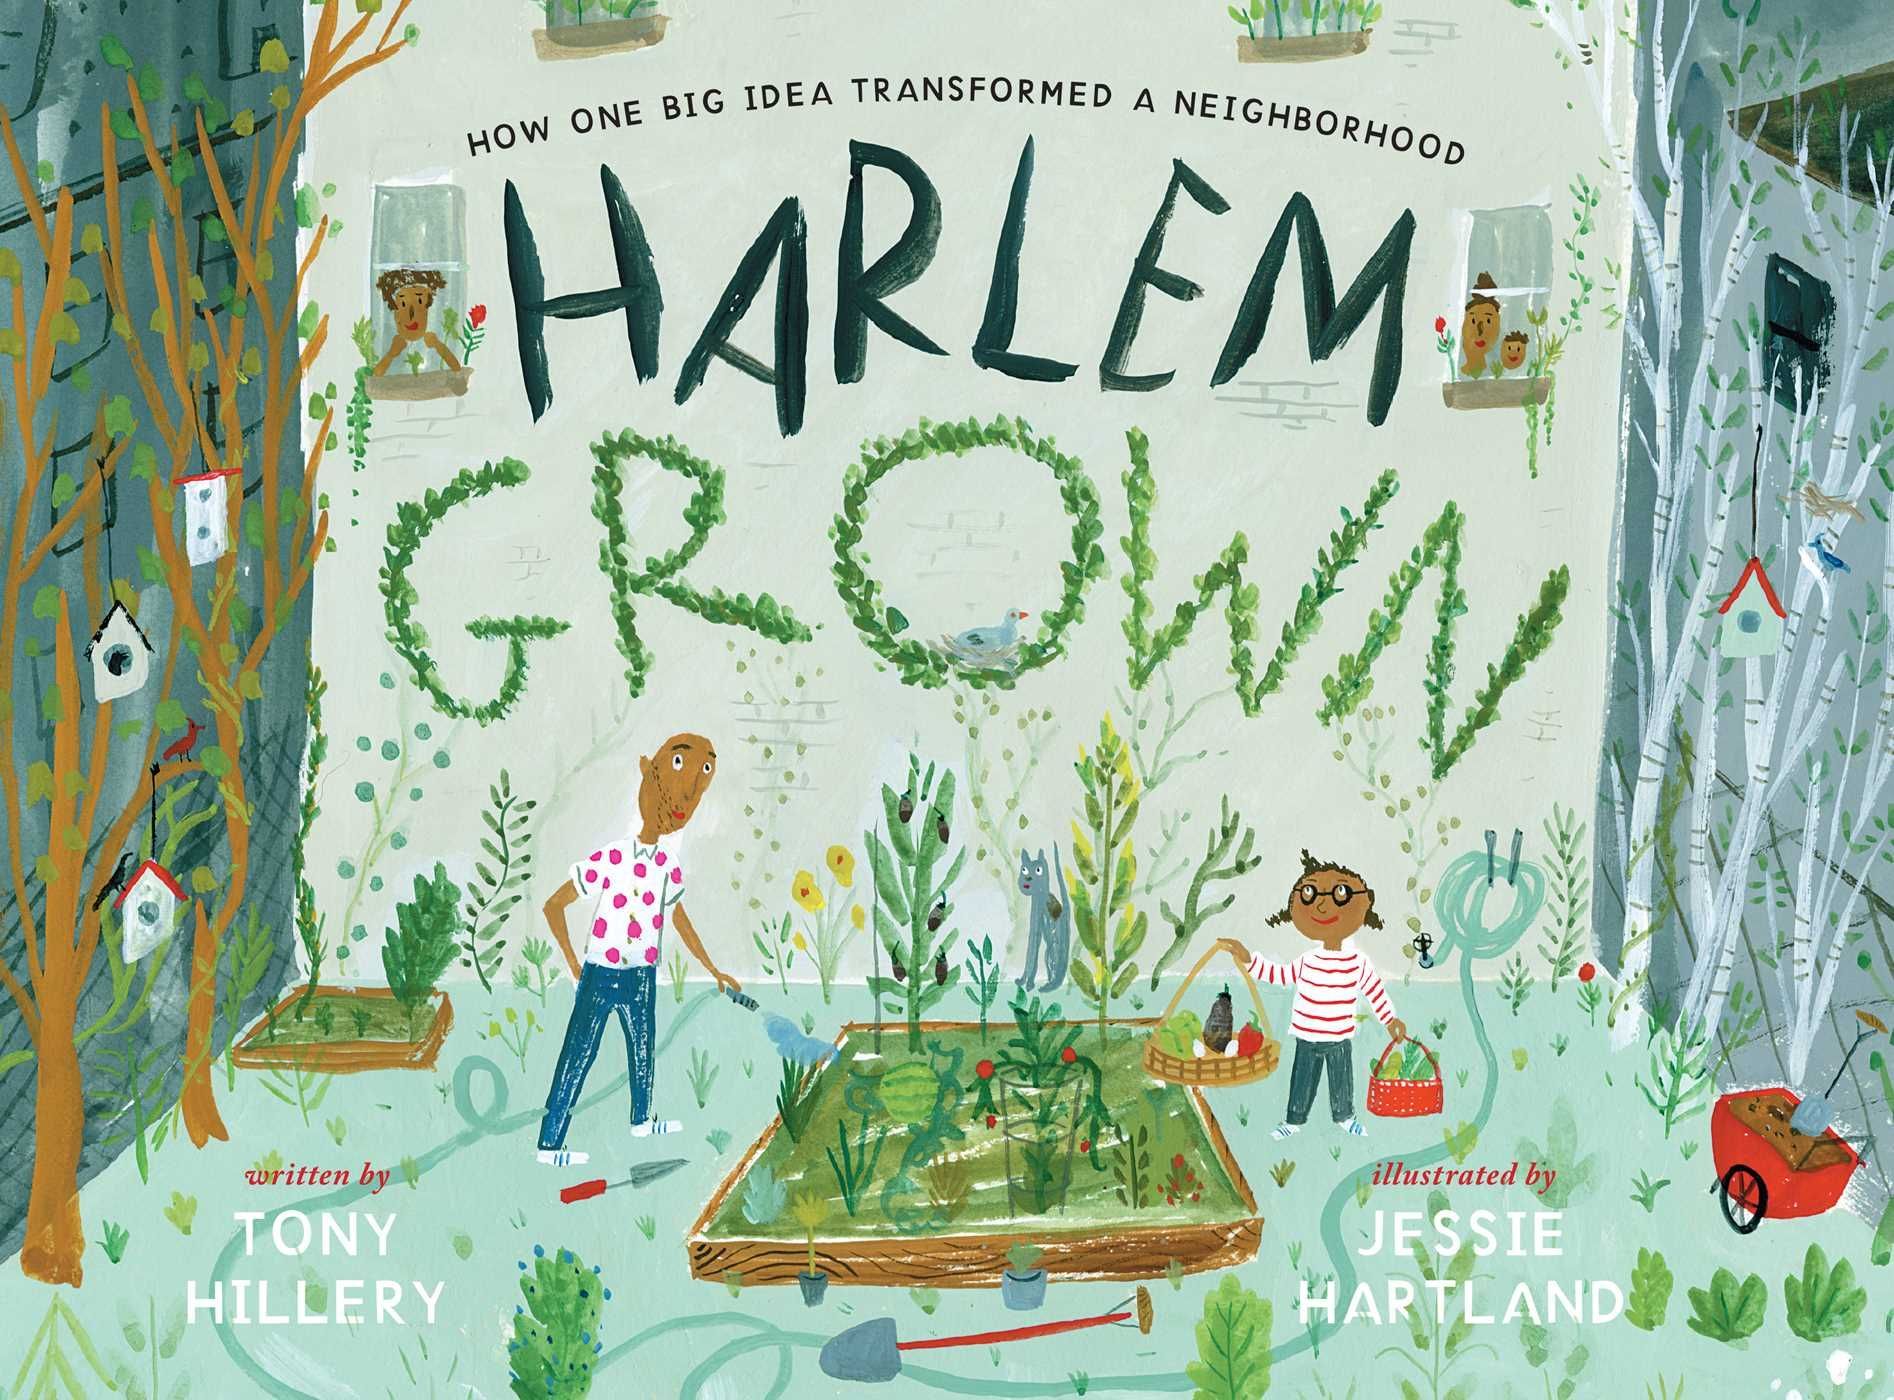 Image of the cover of the book Harlem Grown: How One Big Idea Transformed a Neighborhood by Tony Hillery, illustrated by Jessie Hartland